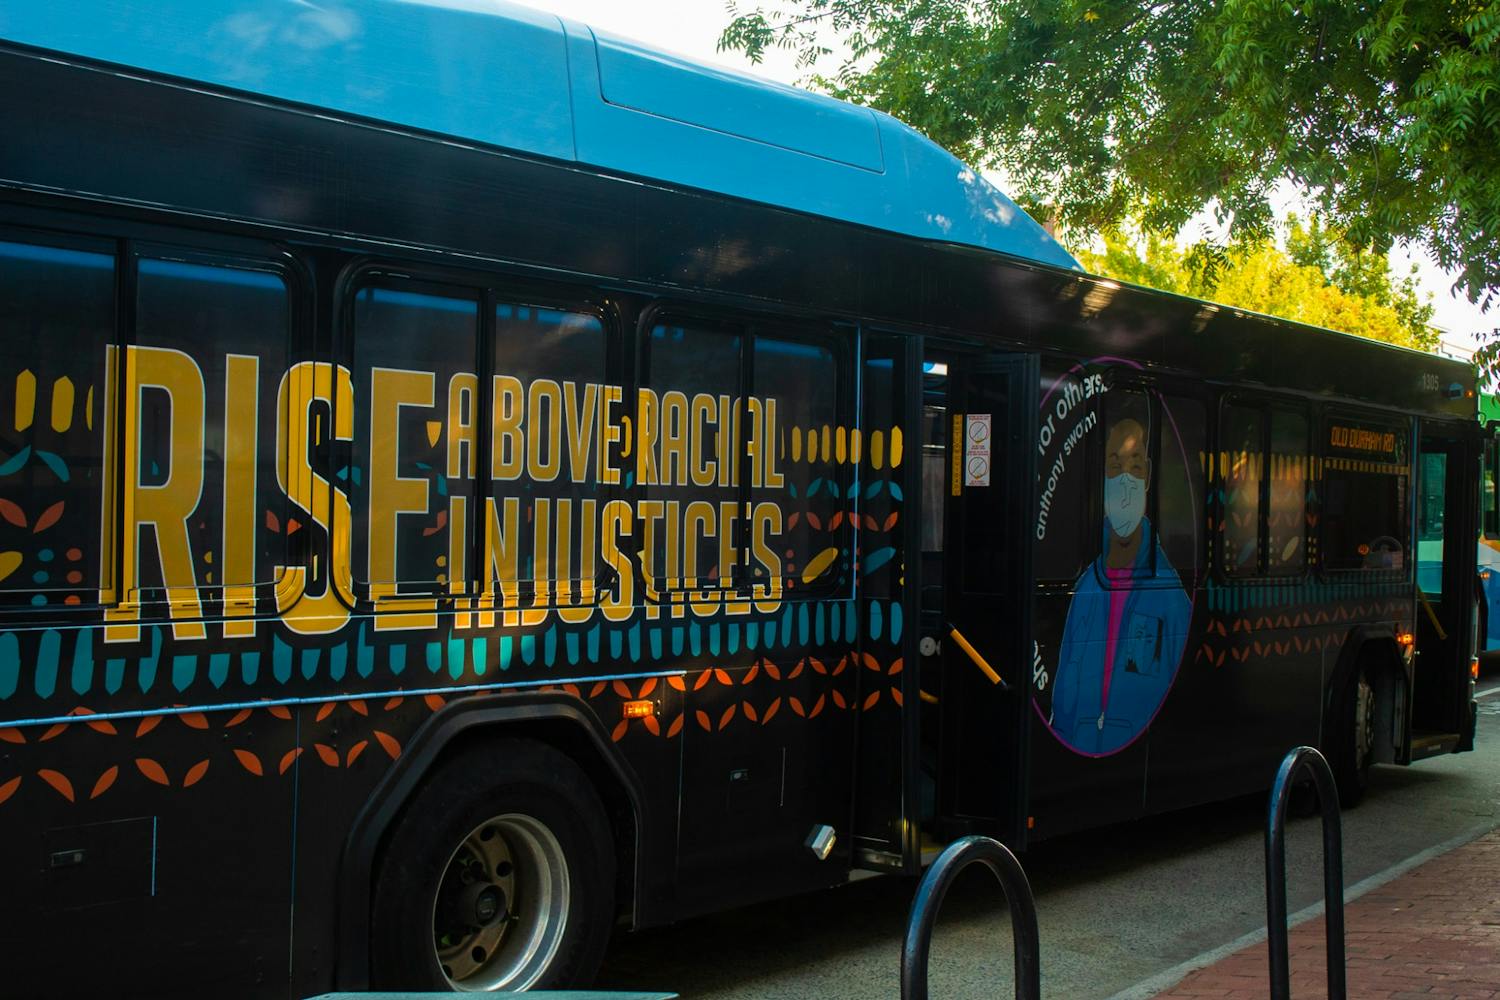 The new art bus, highlighting the the ongoing struggle for racial justice, stopped on Franklin Street for a break between stops.jpg